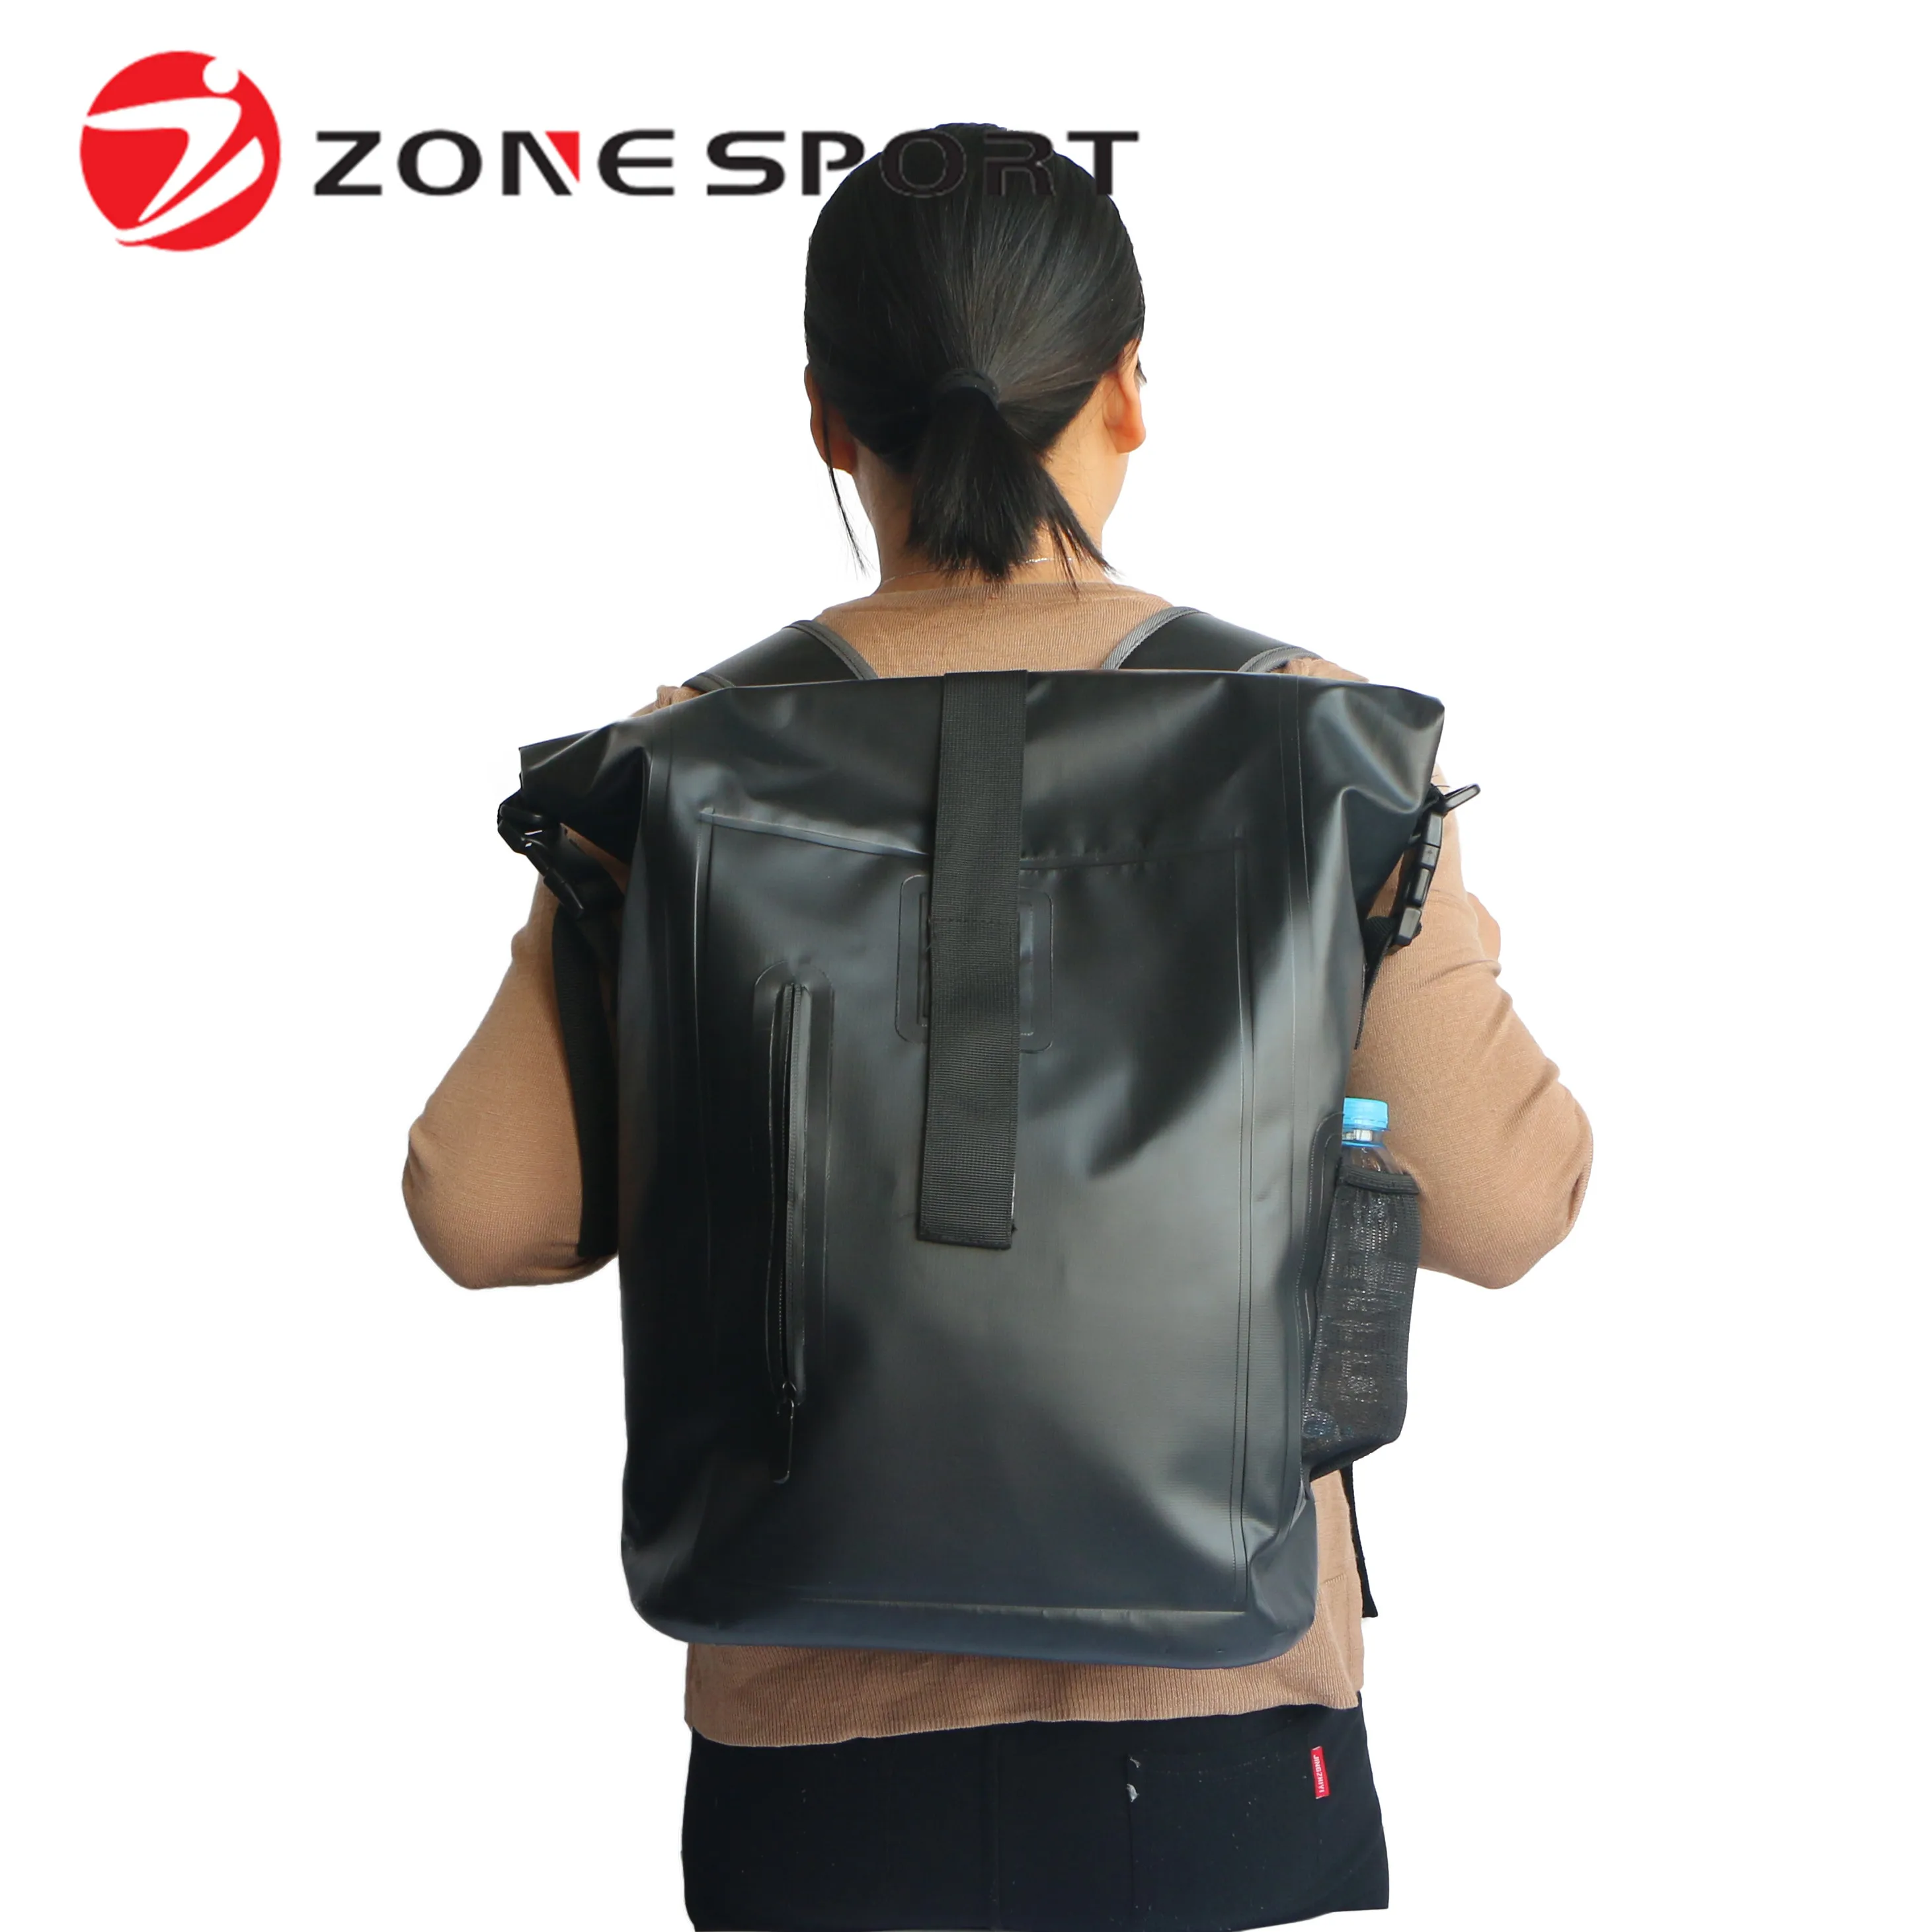 

PVC 20L 30L Best Waterproof Dry Bag Backpack For Outdoor Sports, Black , yellow, blue, green, orange,gray, red or customized